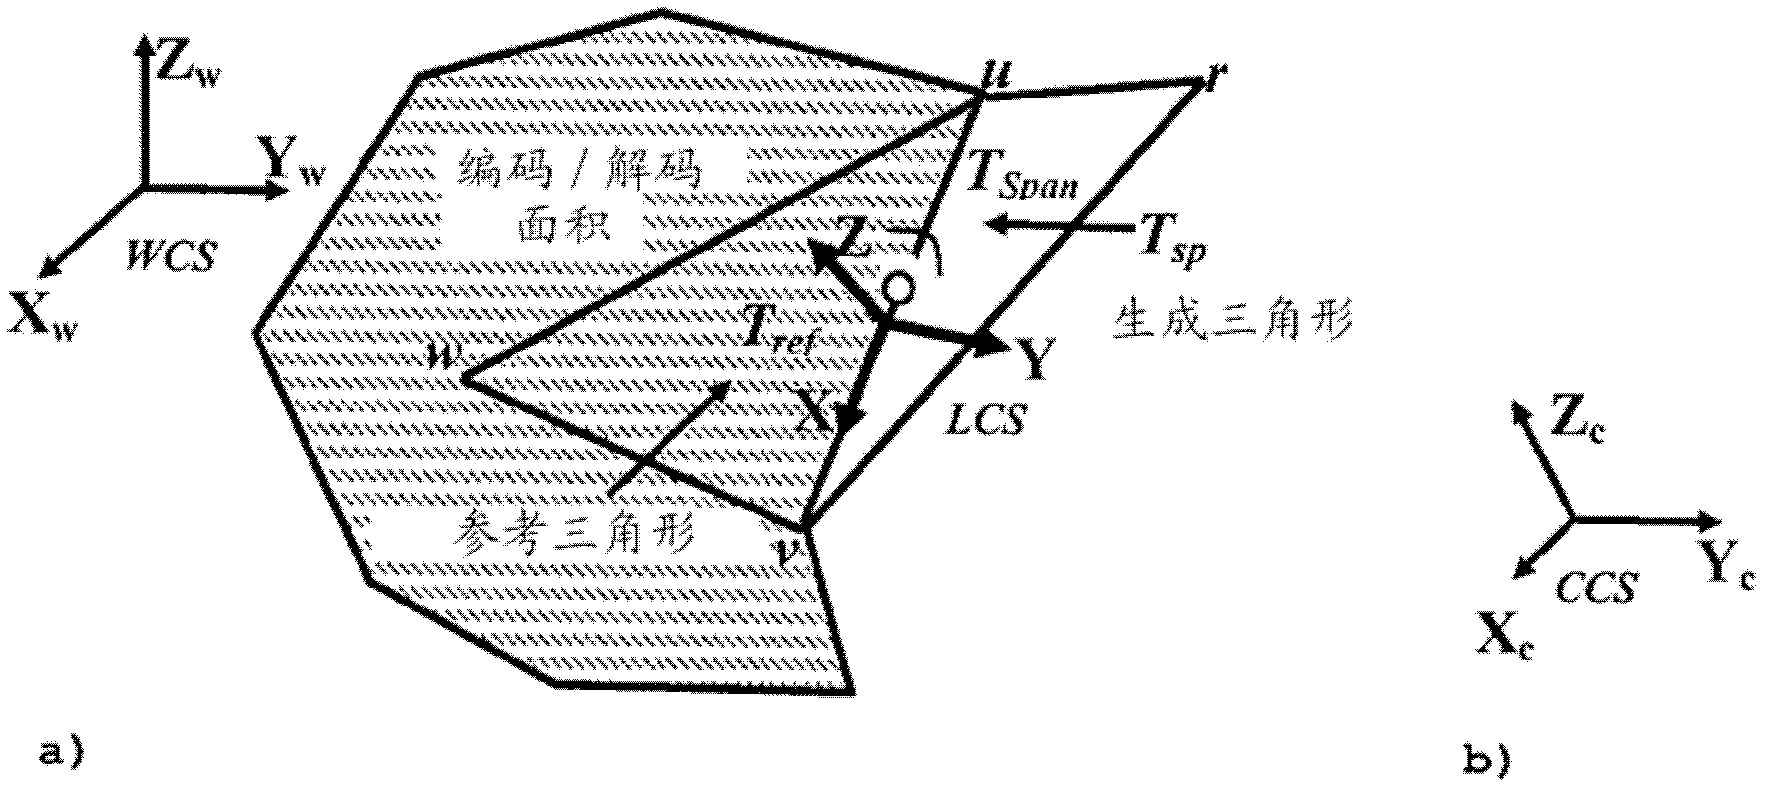 Method for encoding/decoding a 3d mesh model that comprises one or more components